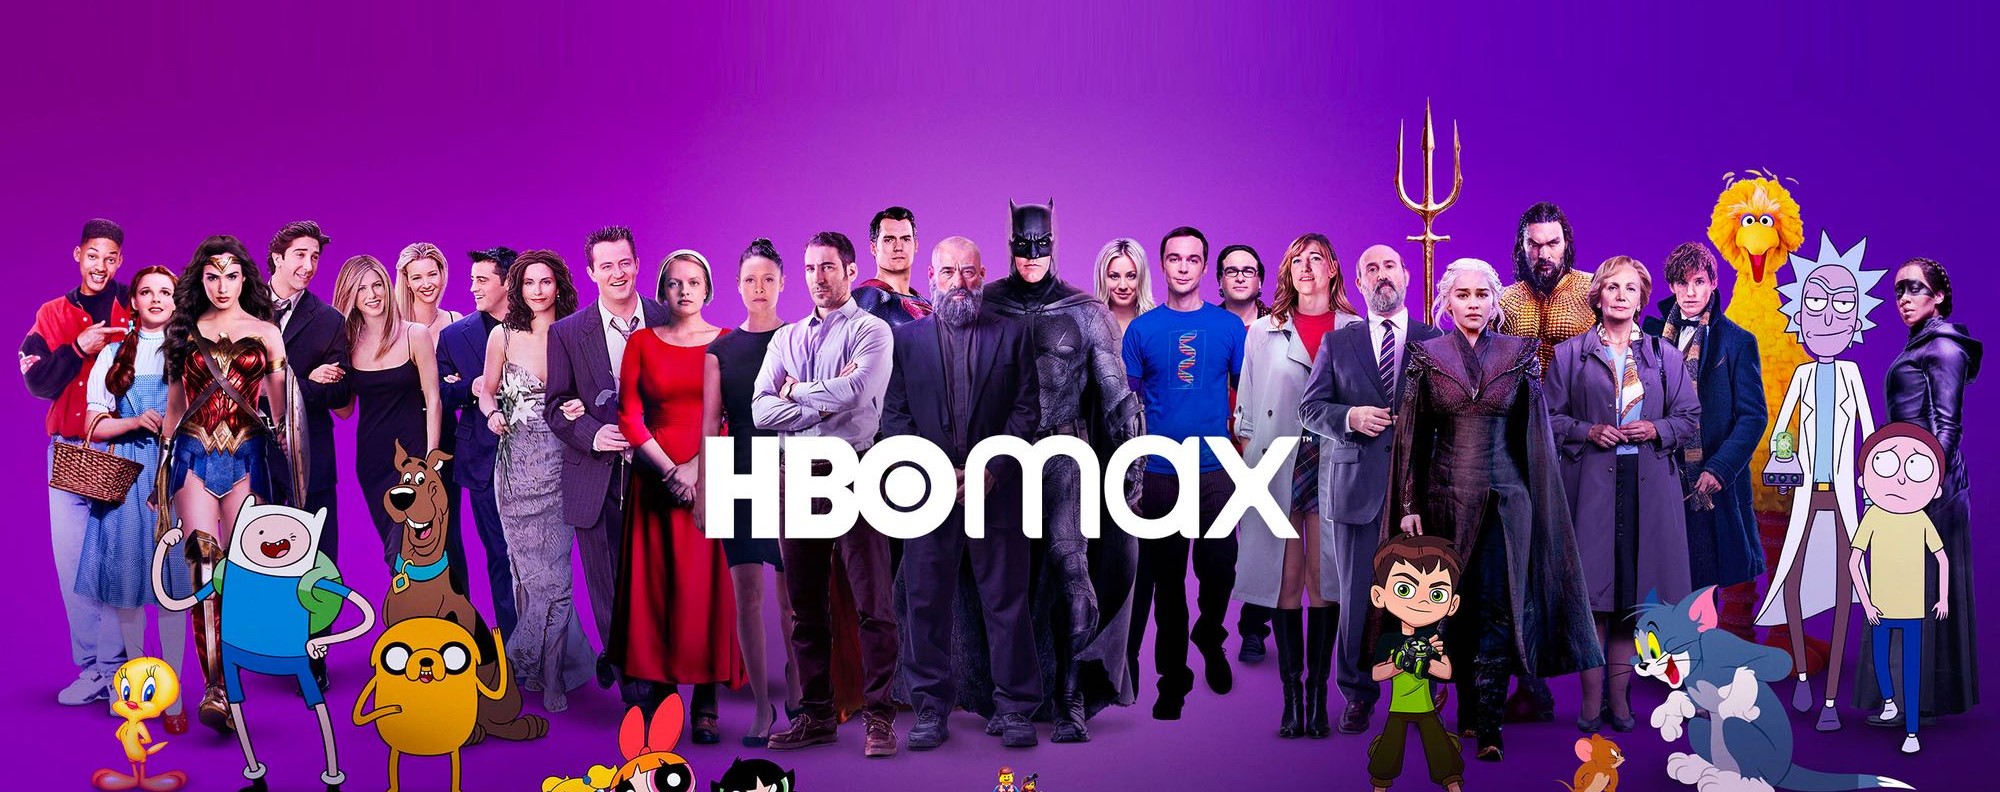 A promo image for HBO Max, featuring characters from shows and films available on the platform, including Friends, Justice League, Rick & Morty, Game of Thrones, Tom & Jerry, Watchmen and Big Bang Theory. Photo: HBO Max